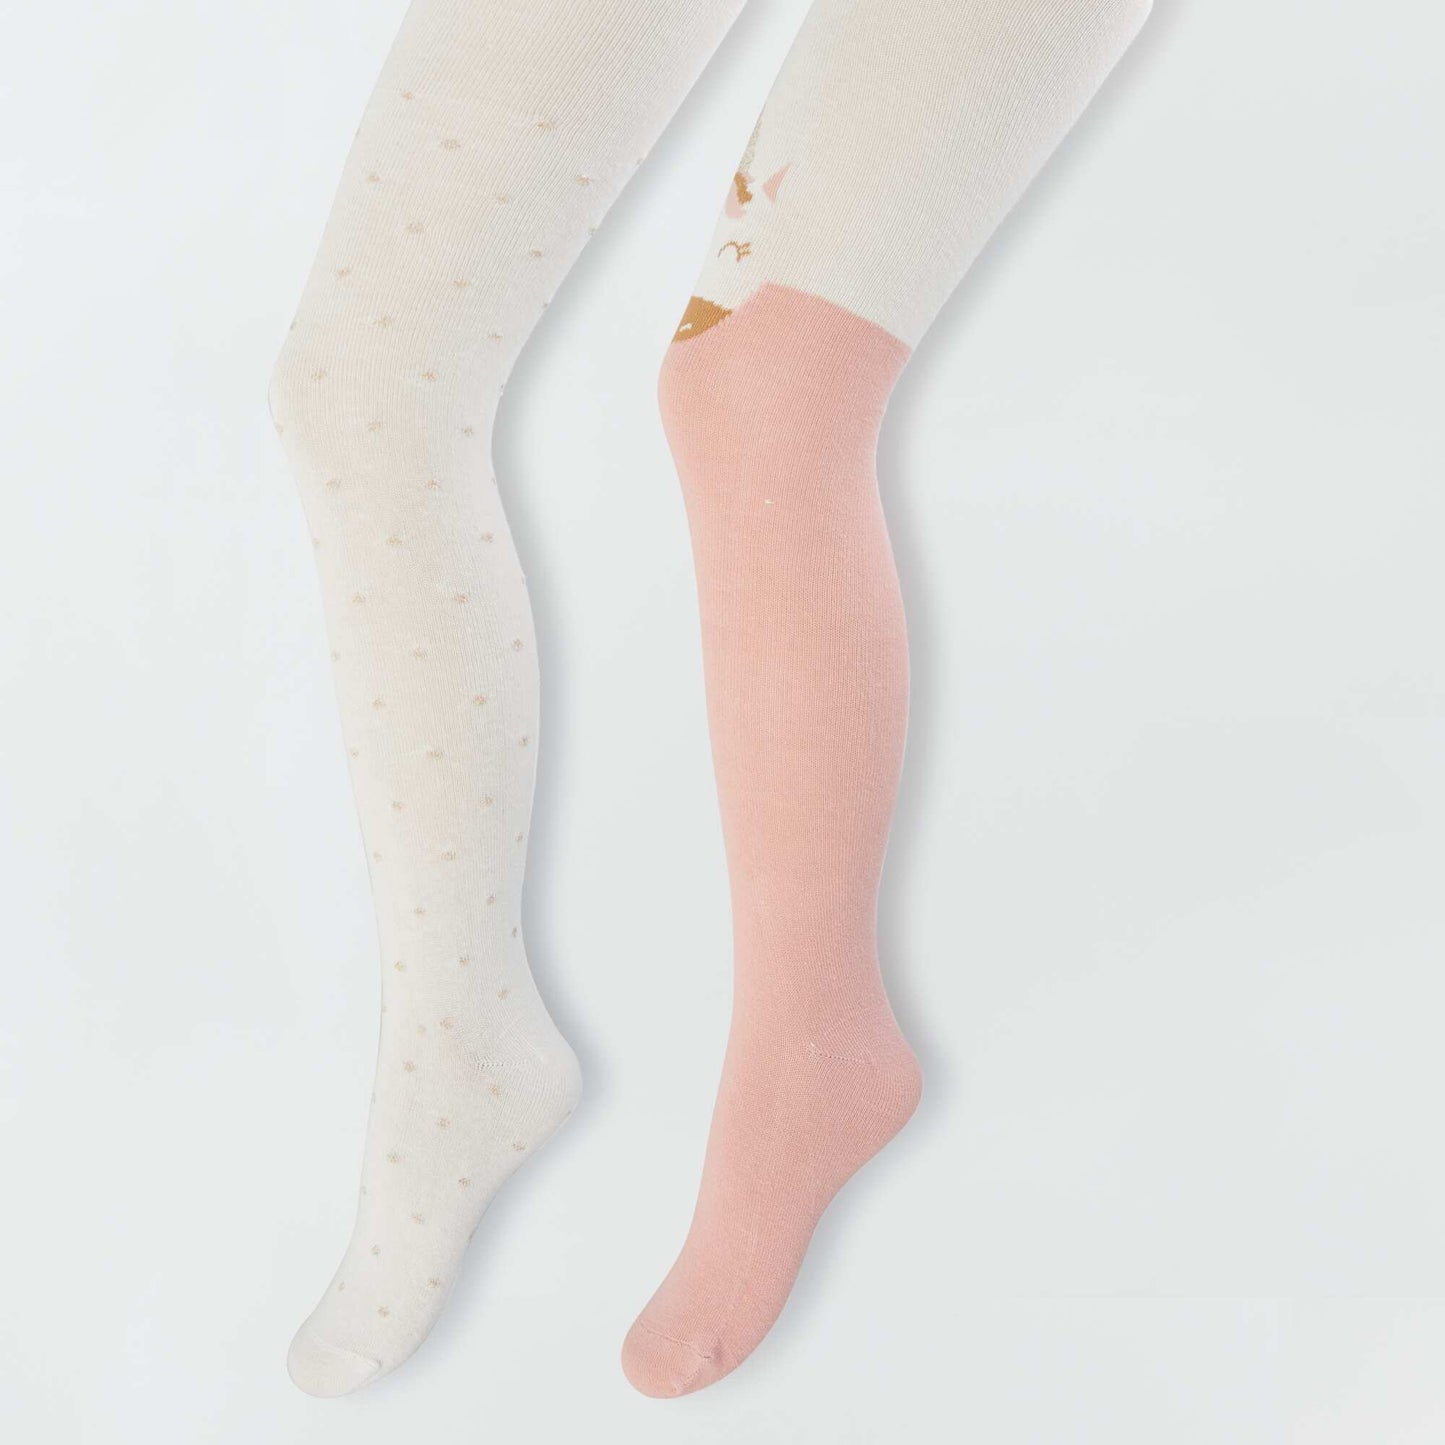 Warm tights with stylish print - Pack of two pairs PINK